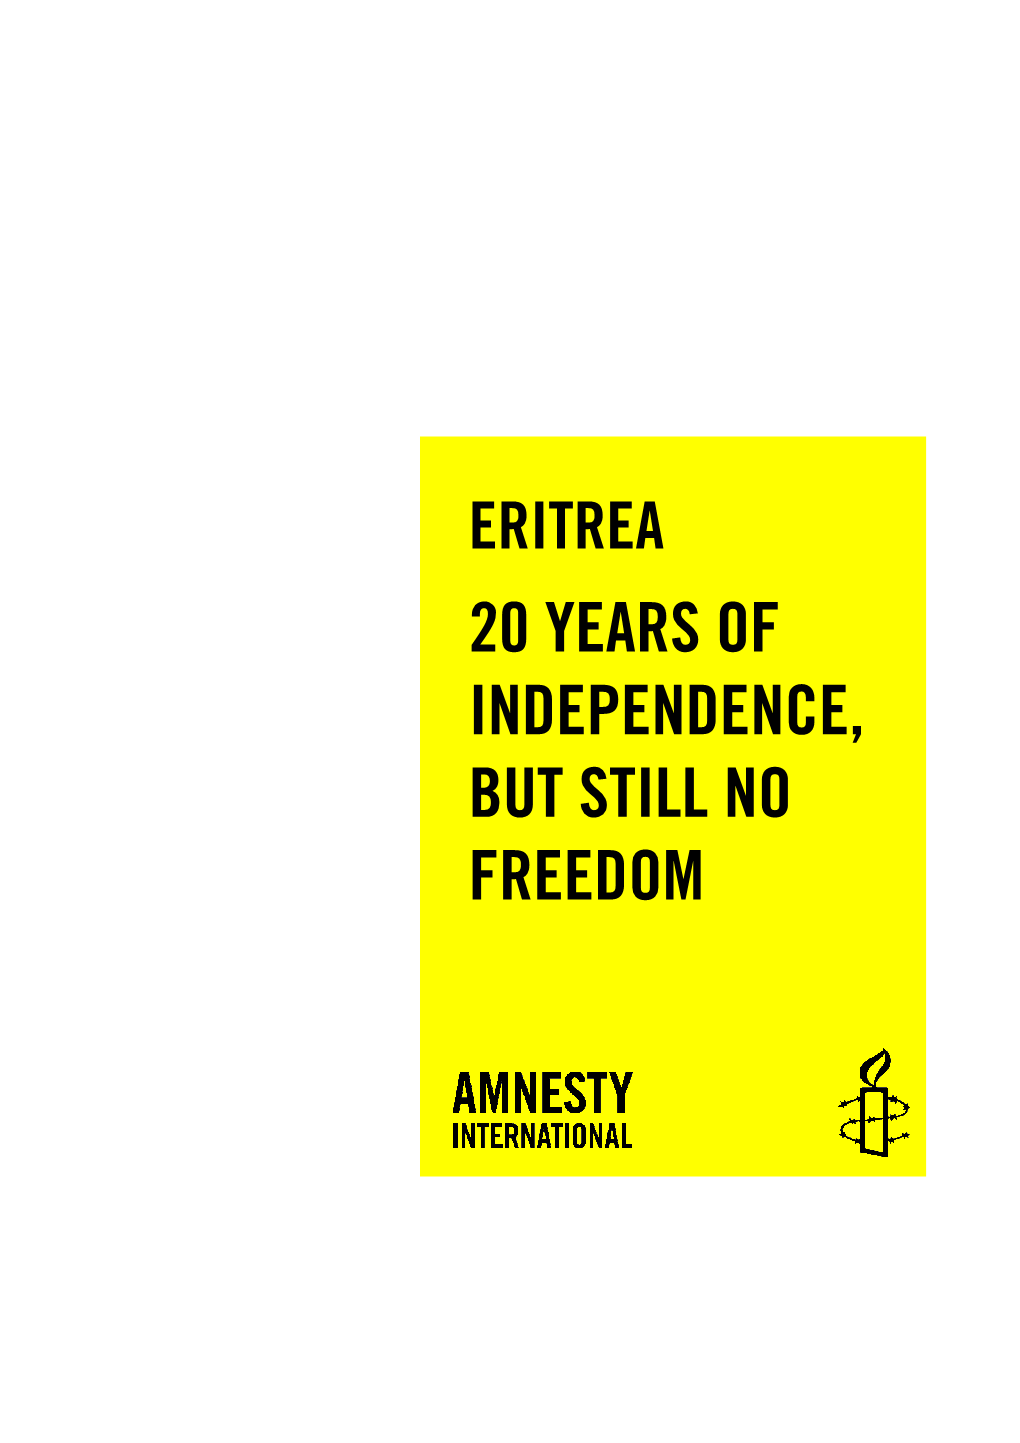 Eritrea 20 Years of Independence, but Still No Freedom